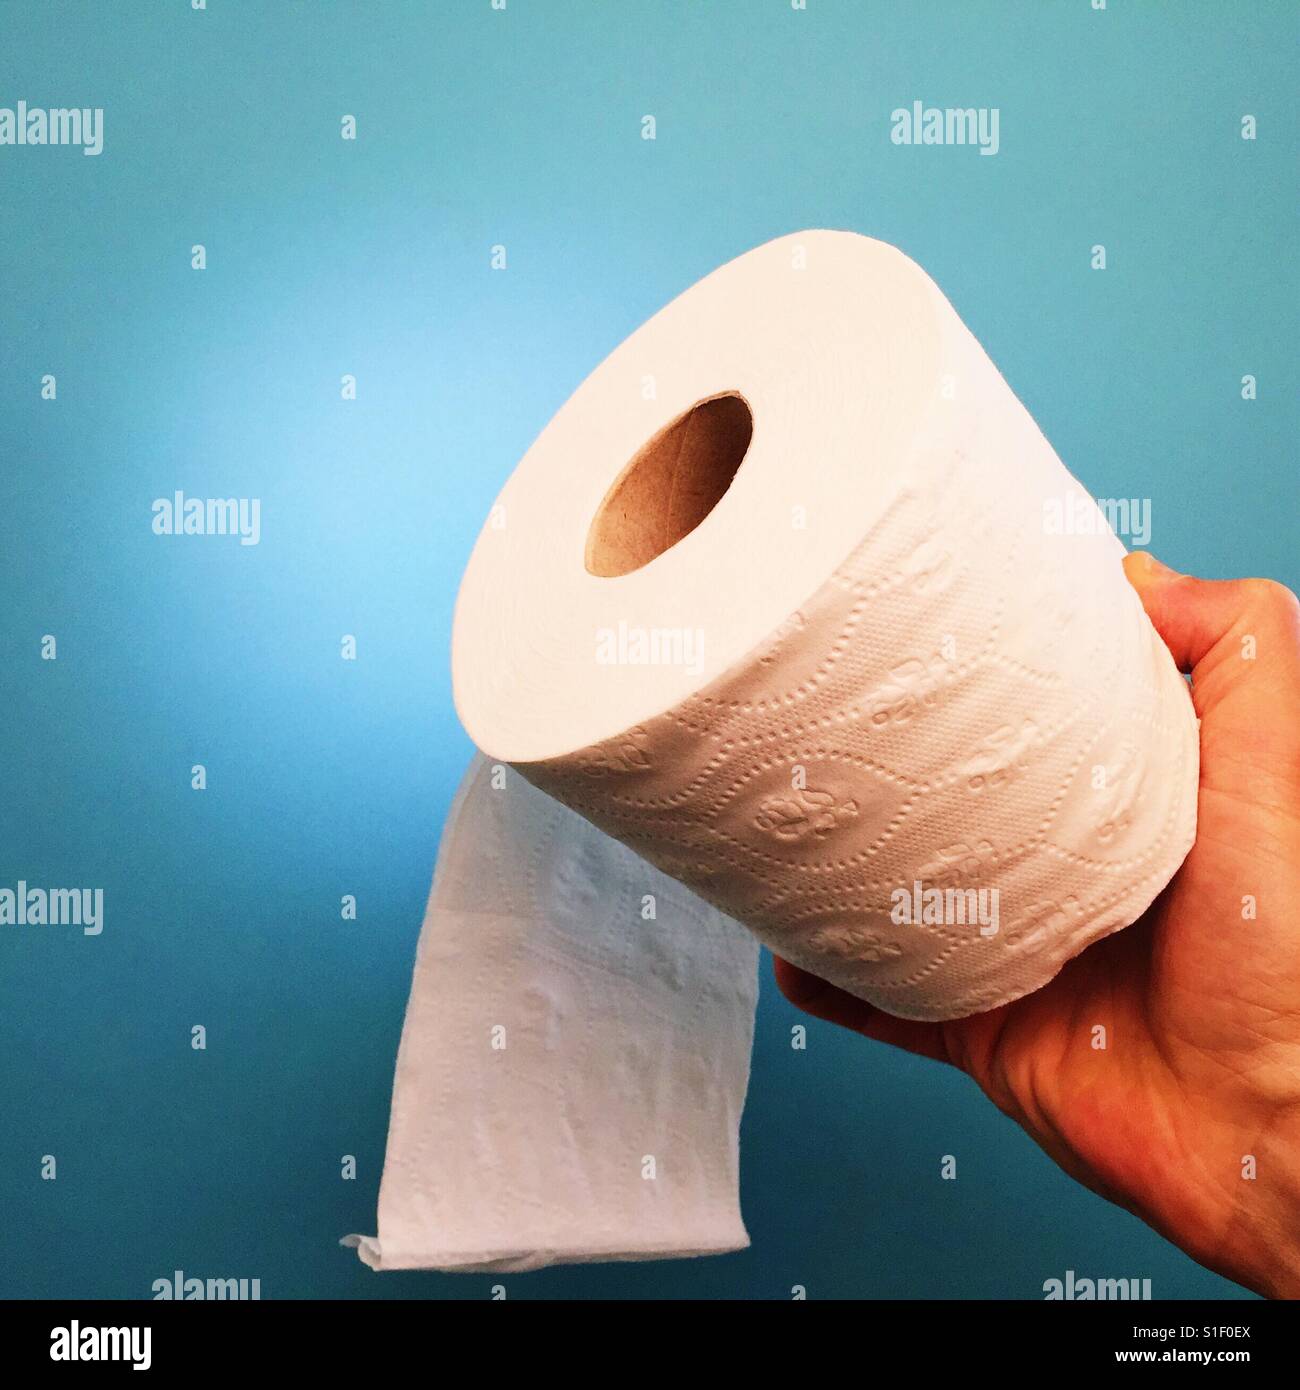 Man's hand holding a roll of toilet paper Stock Photo